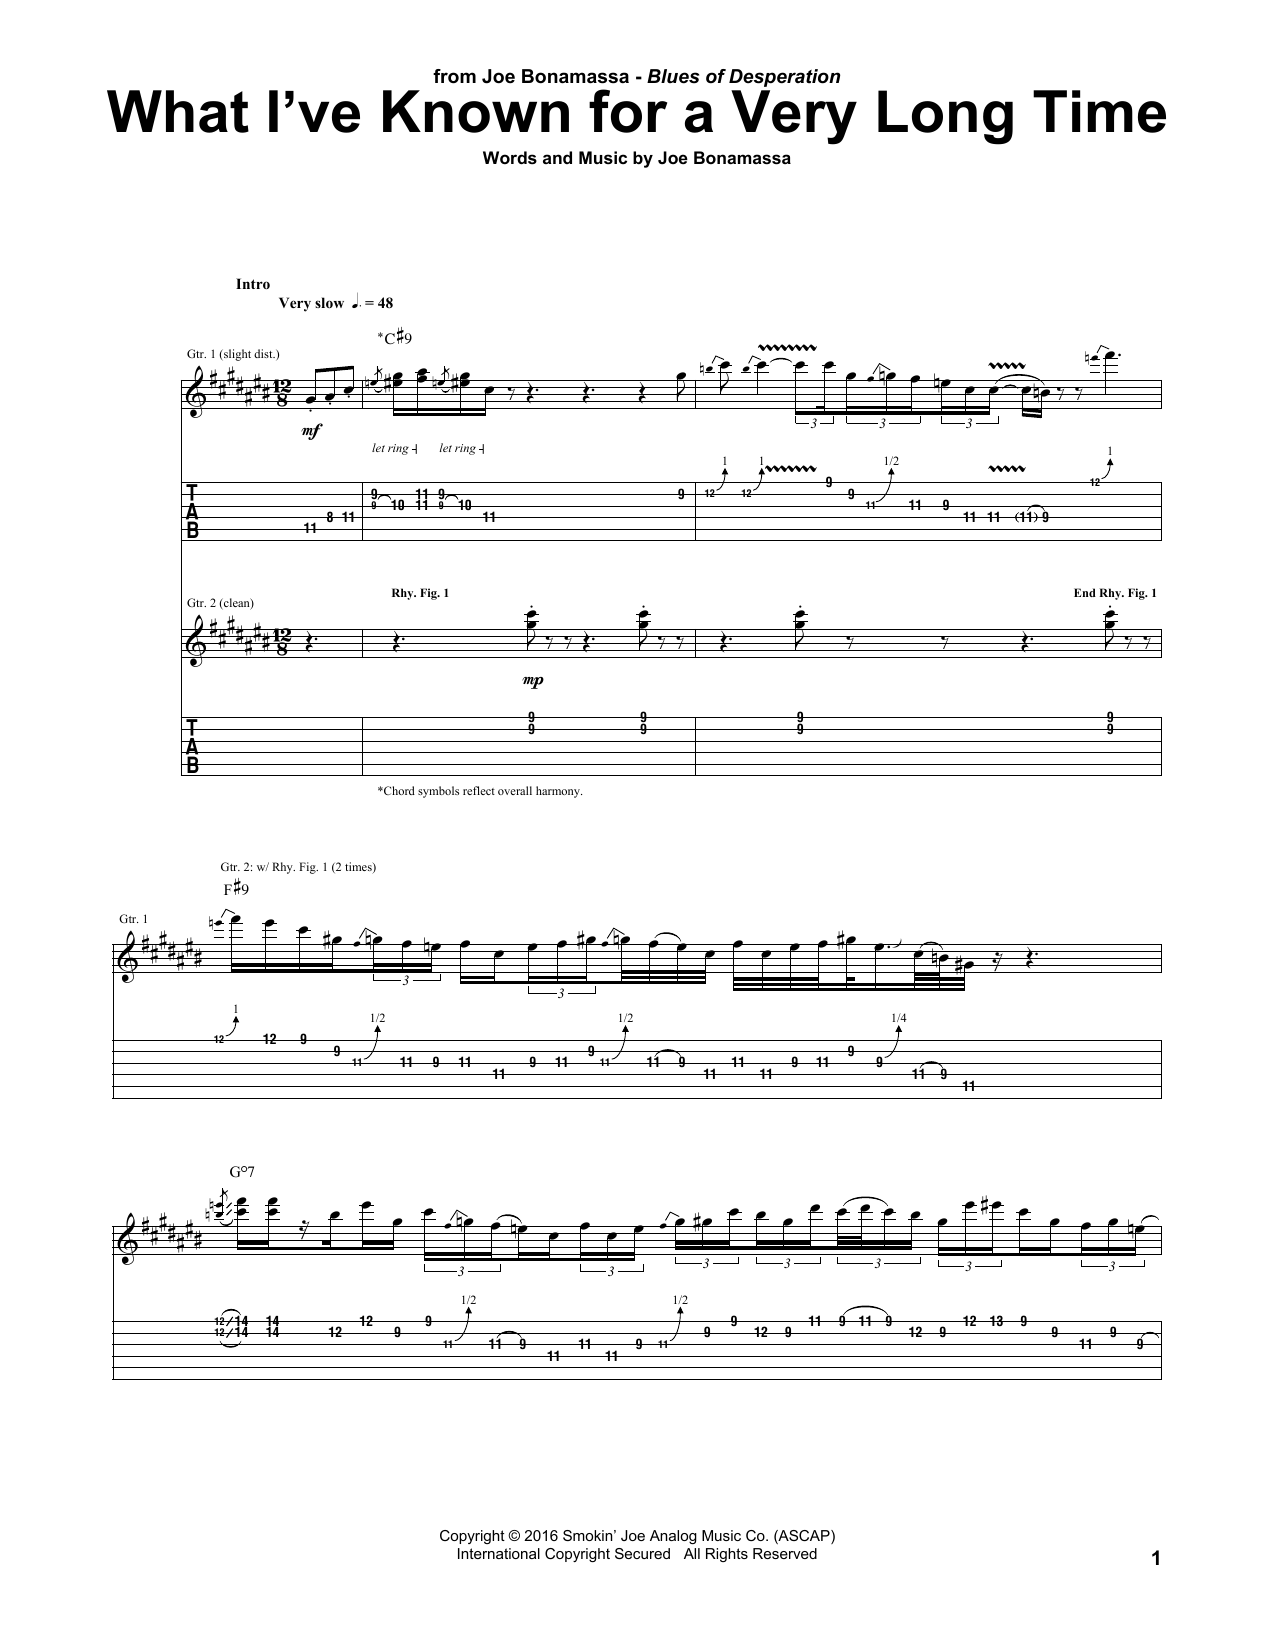 Download Joe Bonamassa What I've Known For A Very Long Time Sheet Music